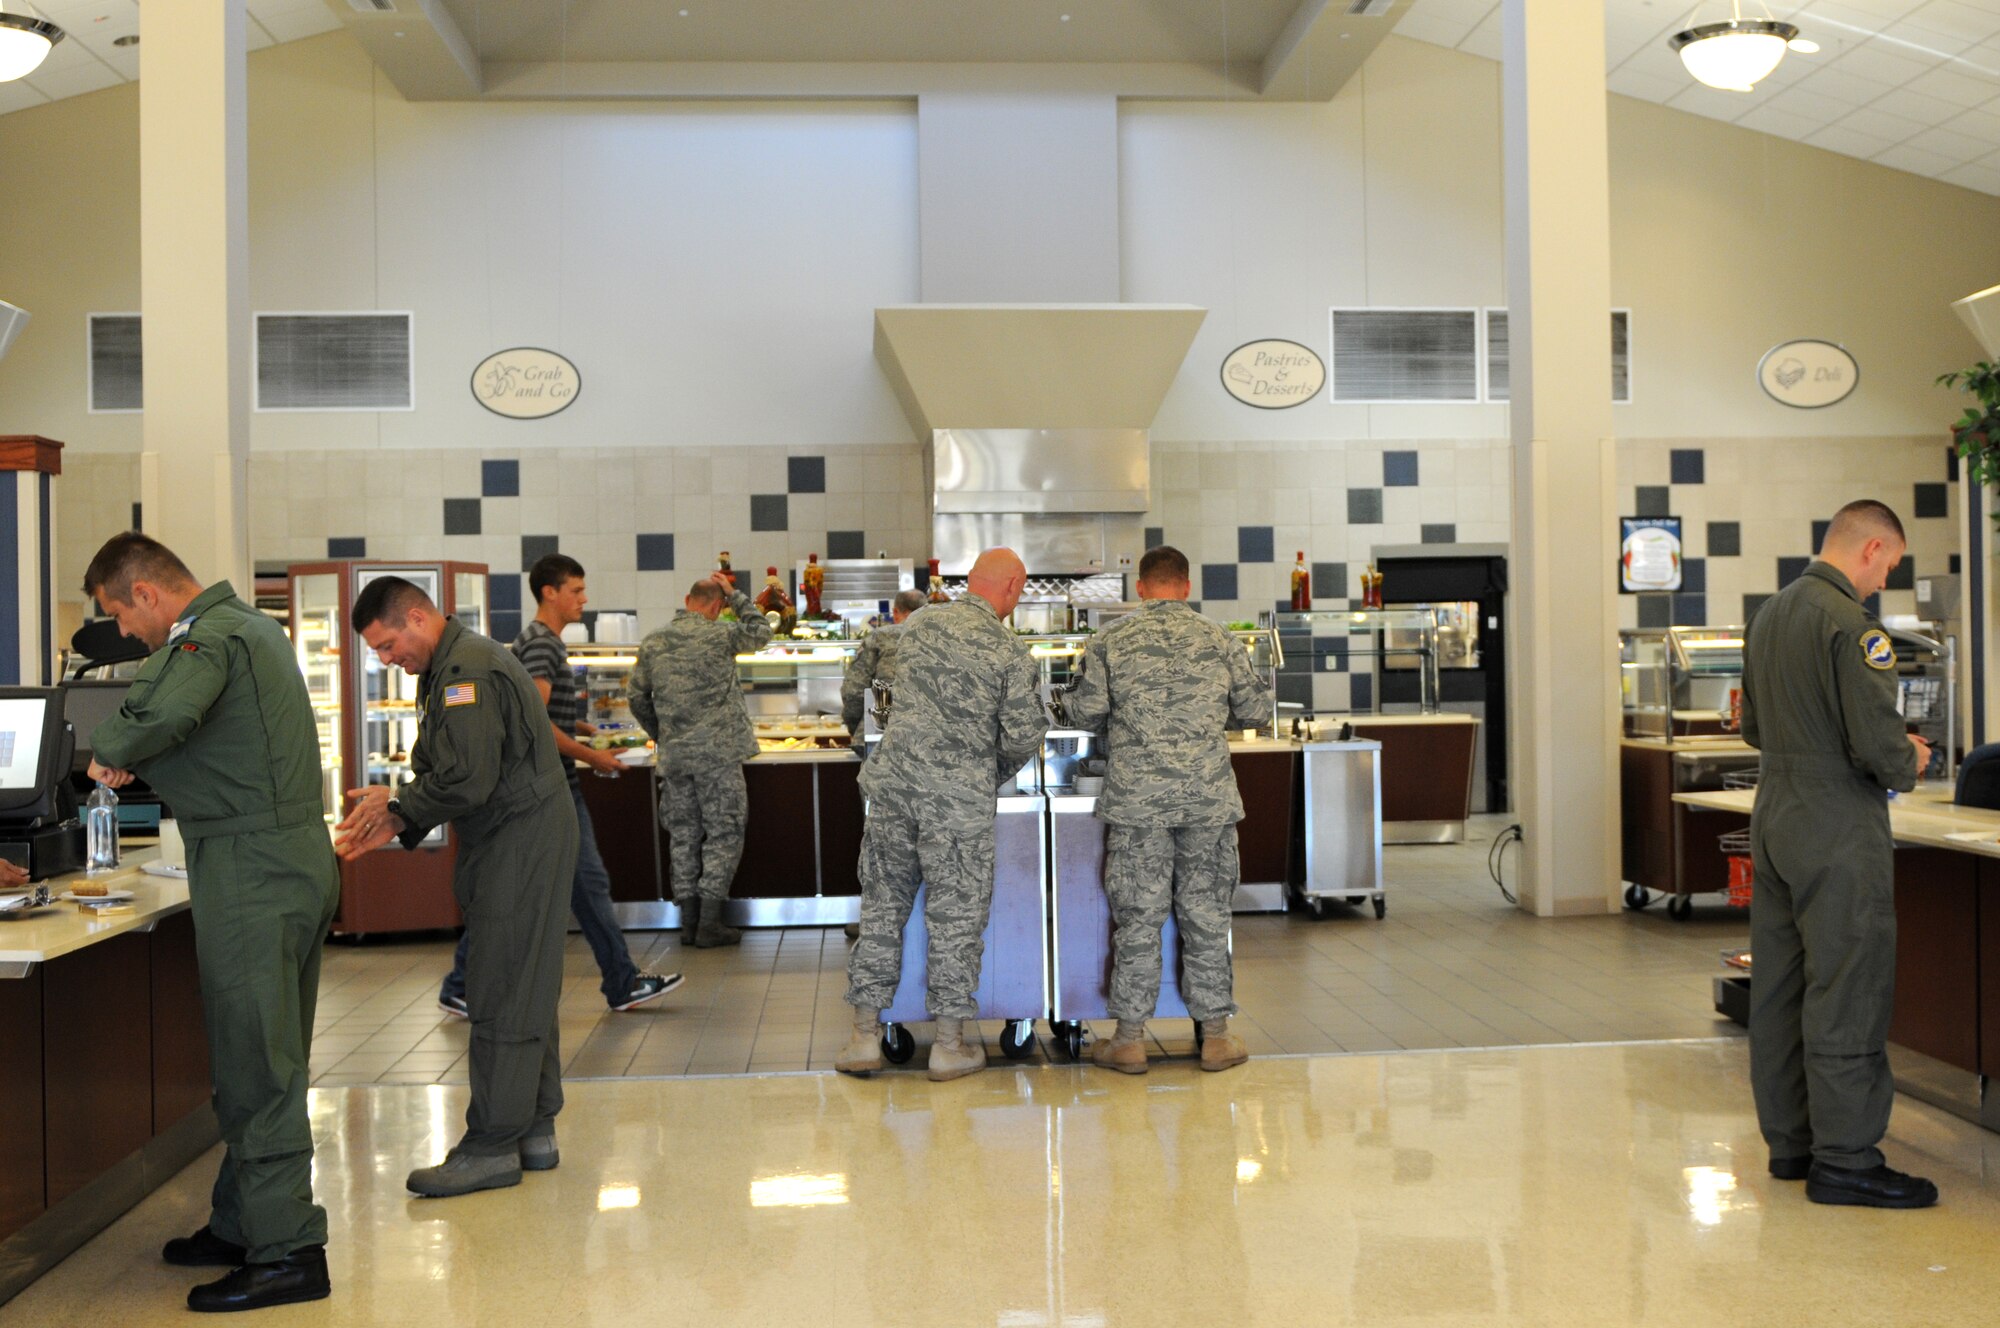 The Hercules Dining Facility staff offer Soldiers, Sailors, Airmen and Marines a variety of meal options from main entrées, salads bar, deli sandwiches, short order options and desserts. (Courtesy photo by Ashley Mangin)